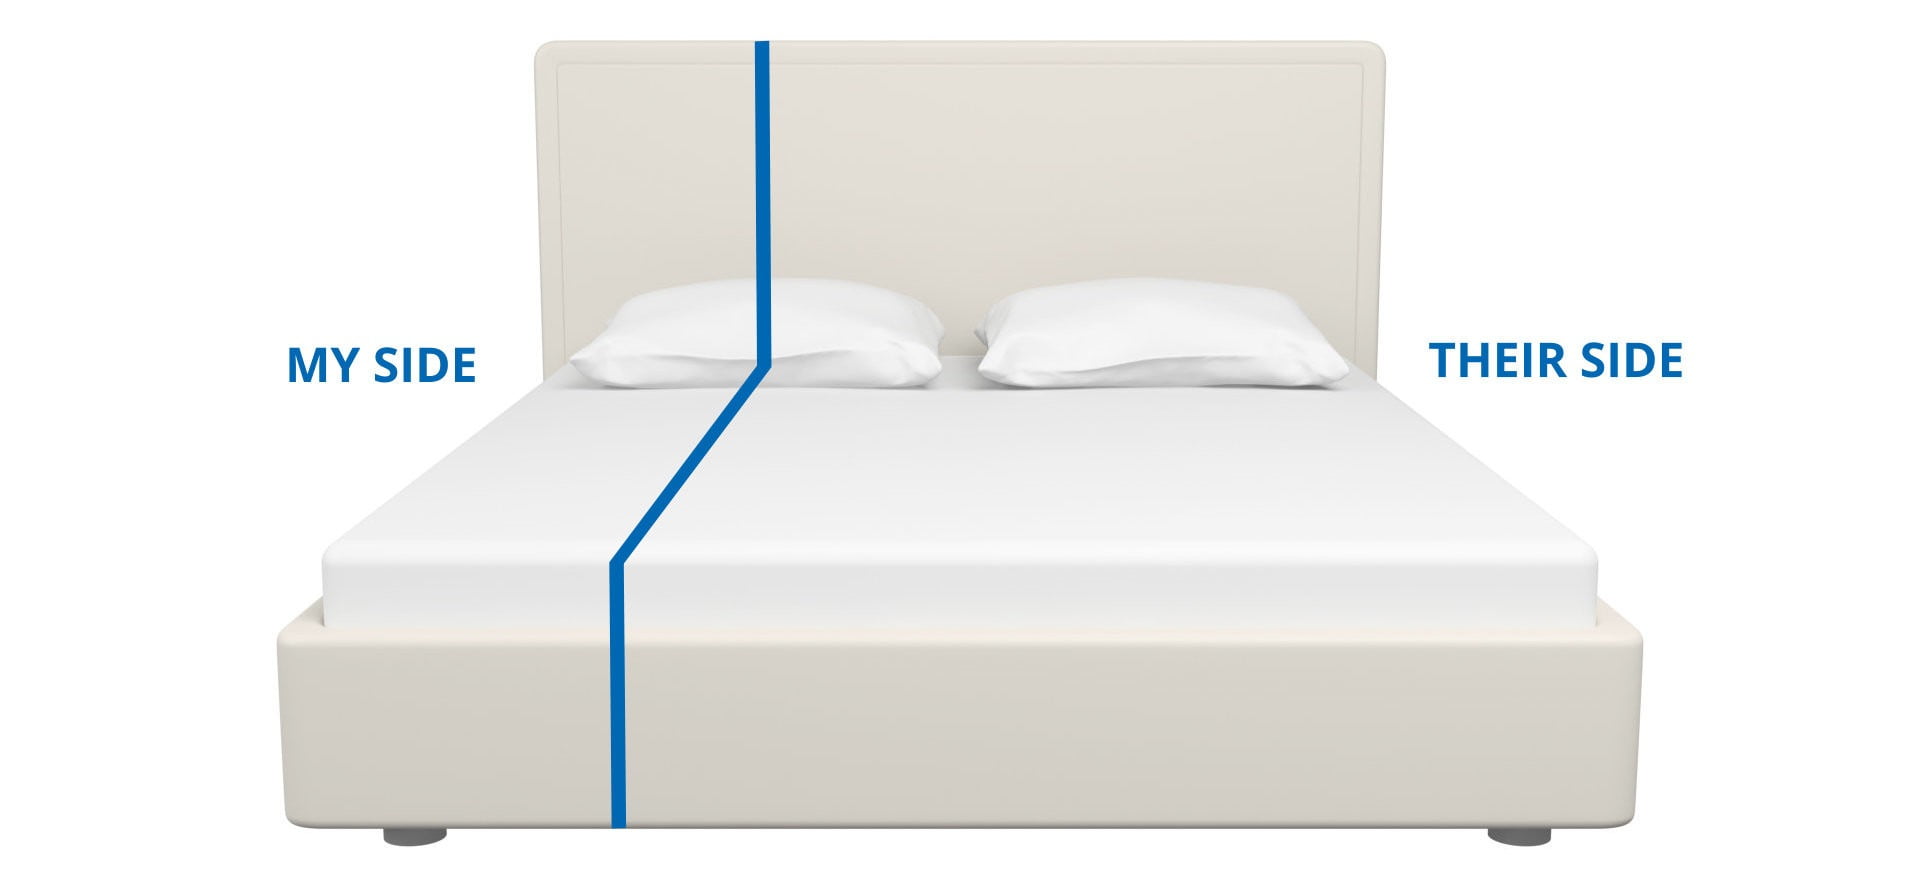 Bed Sizes Uk And Mattress Size, Super King Size Bed Dimensions Bedding Uk